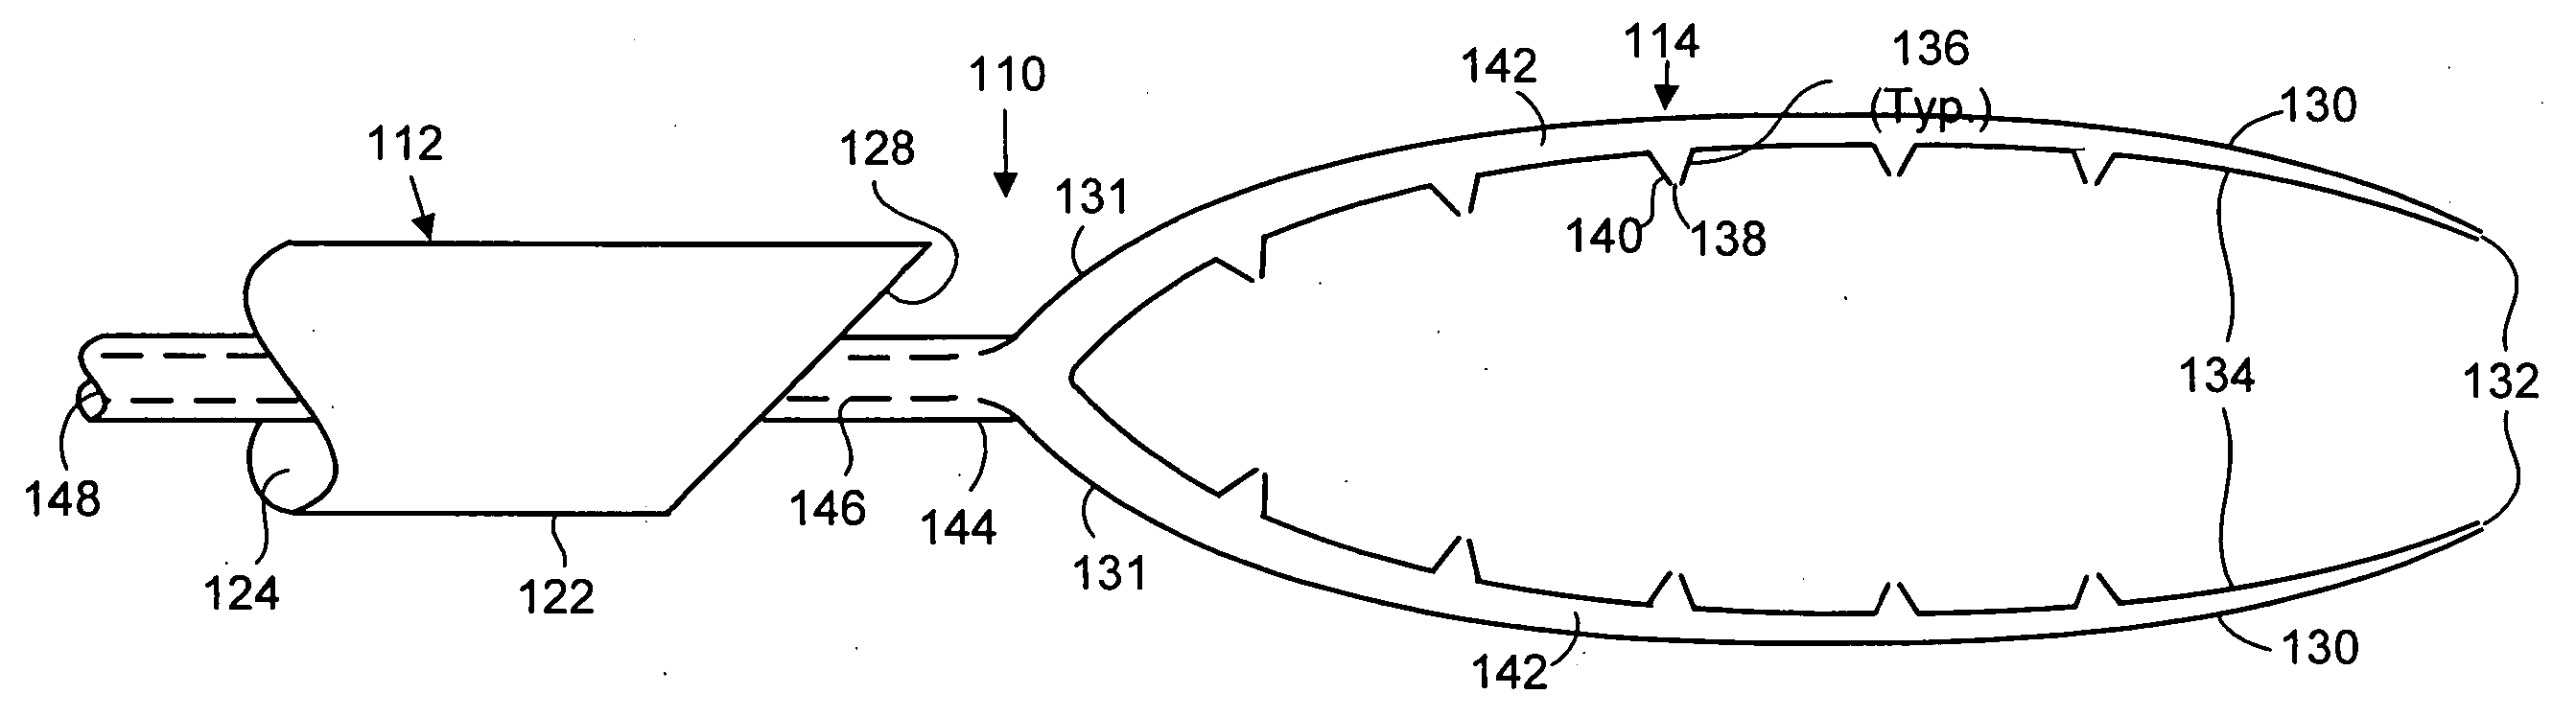 Liquid infusion apparatus for radiofrequency tissue ablation